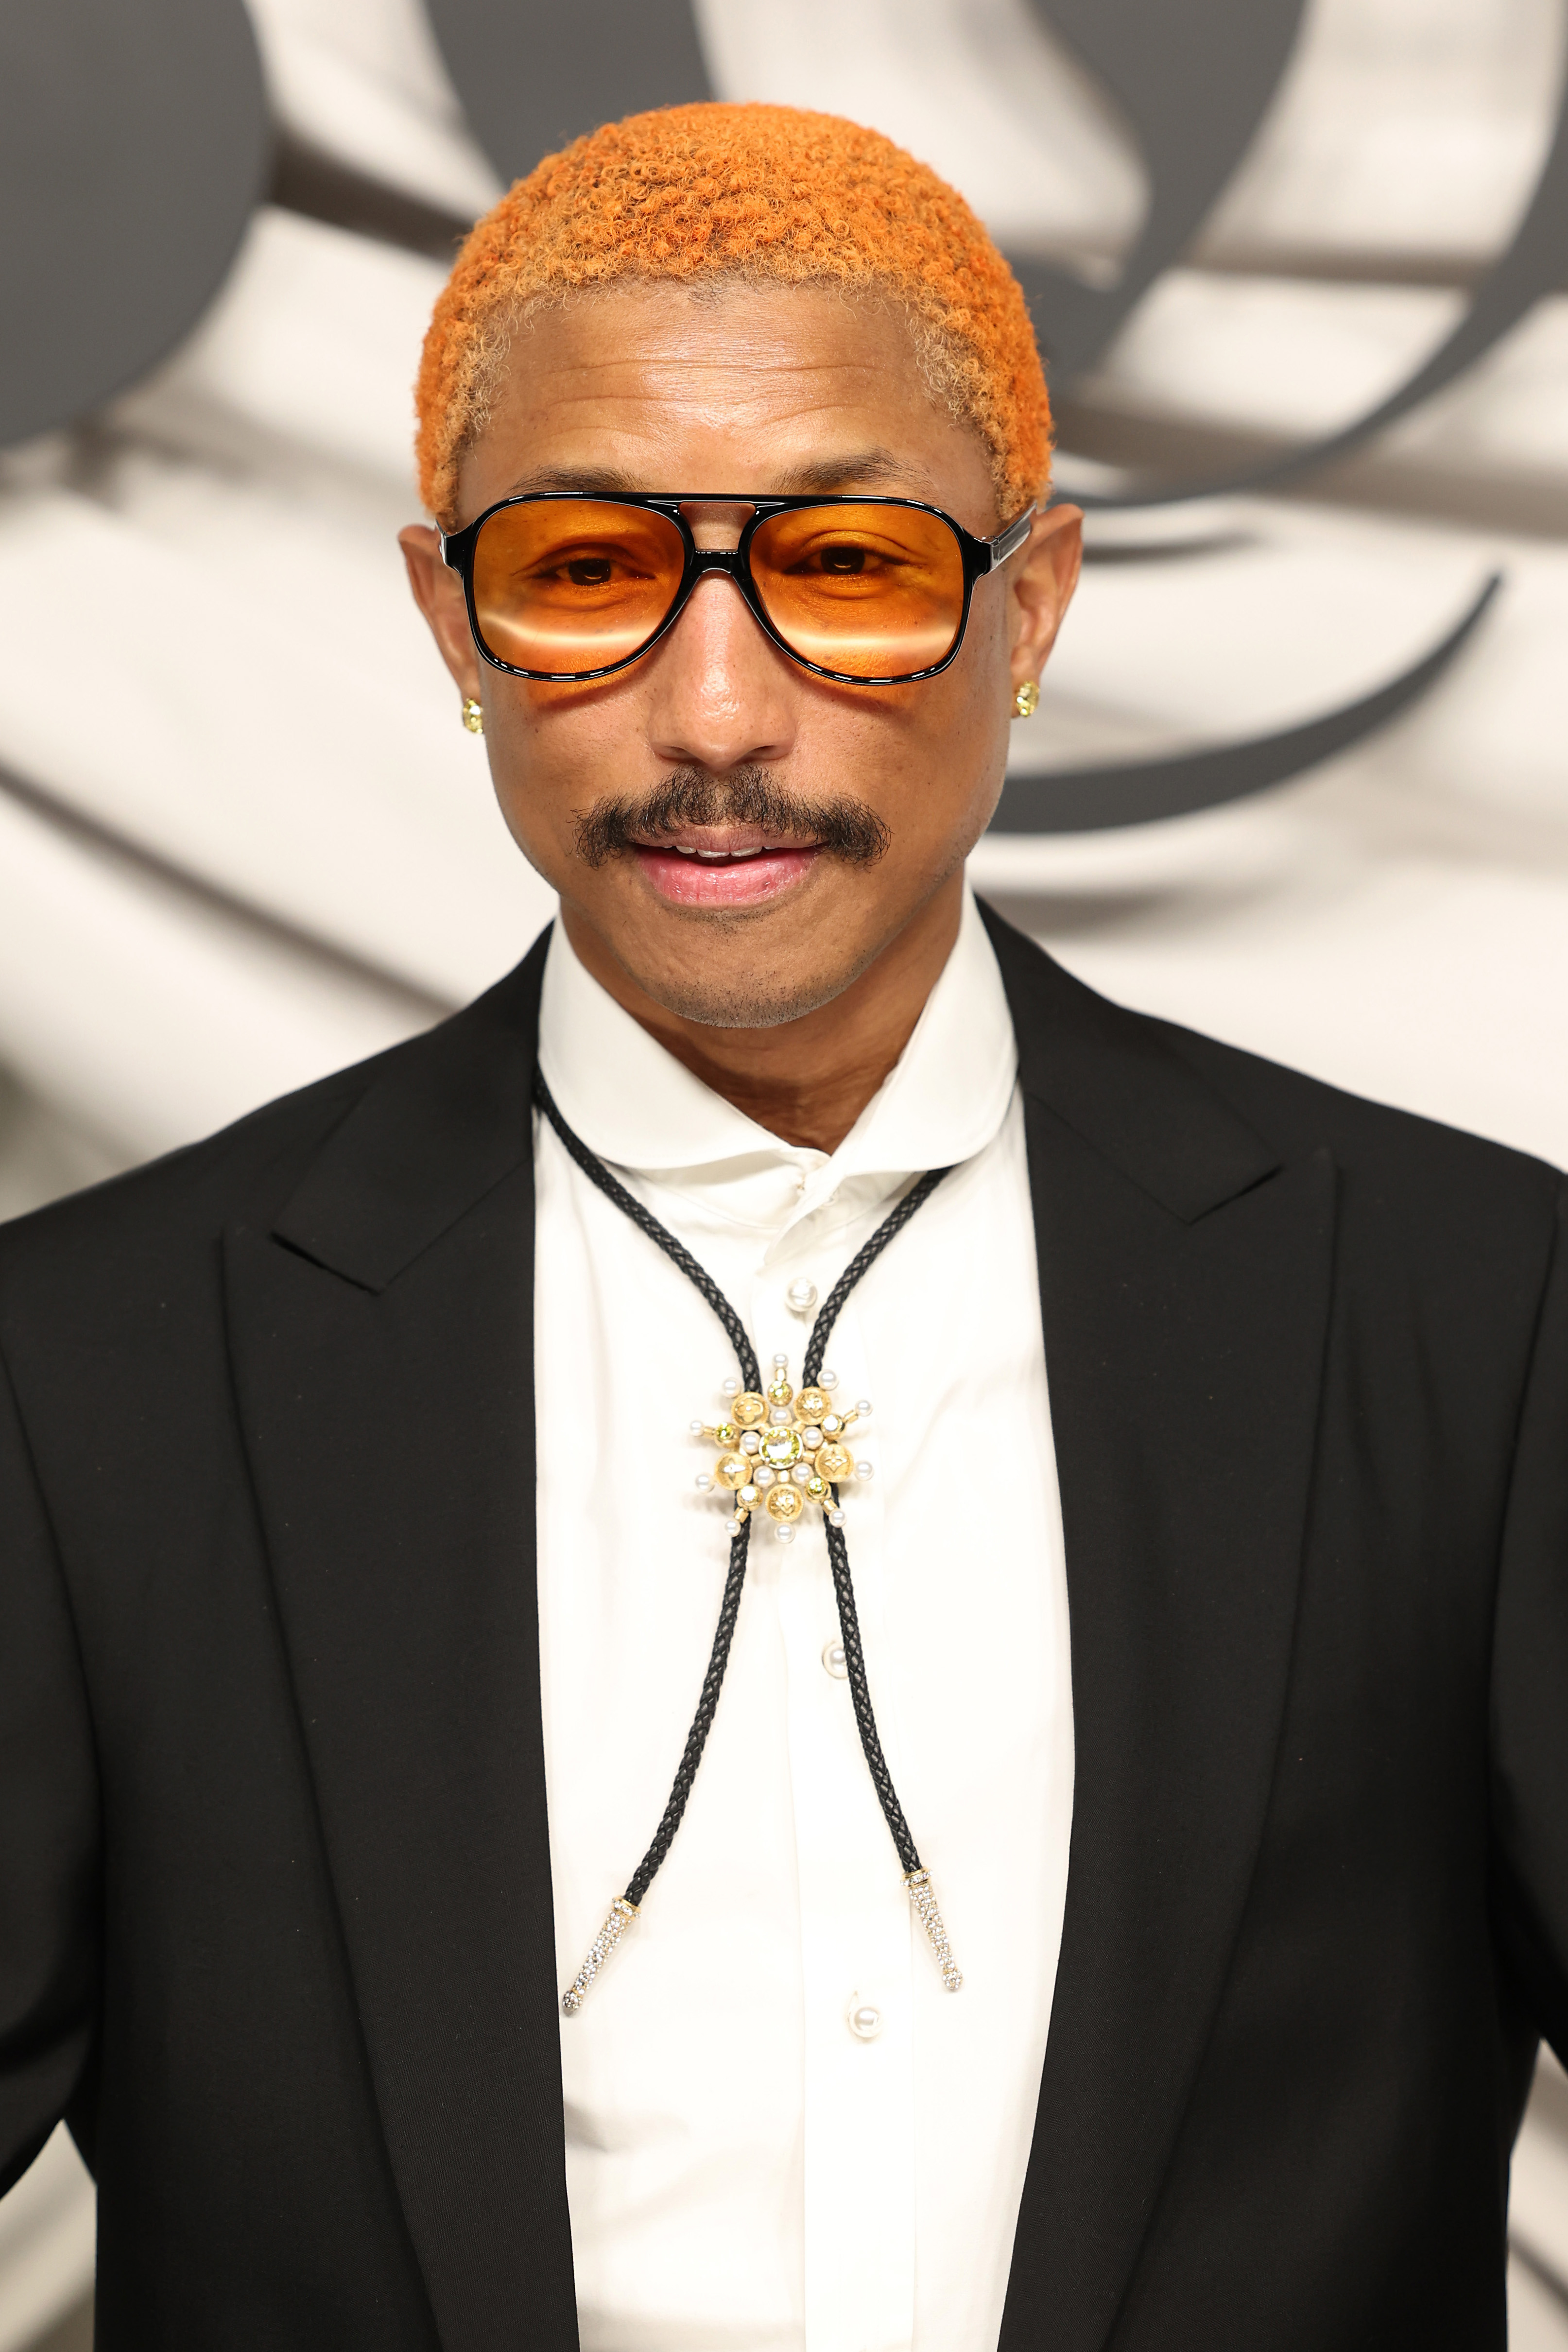 Pharrell with orange  hair and large glasses, wearing a black suit and ornate brooch on a white shirt